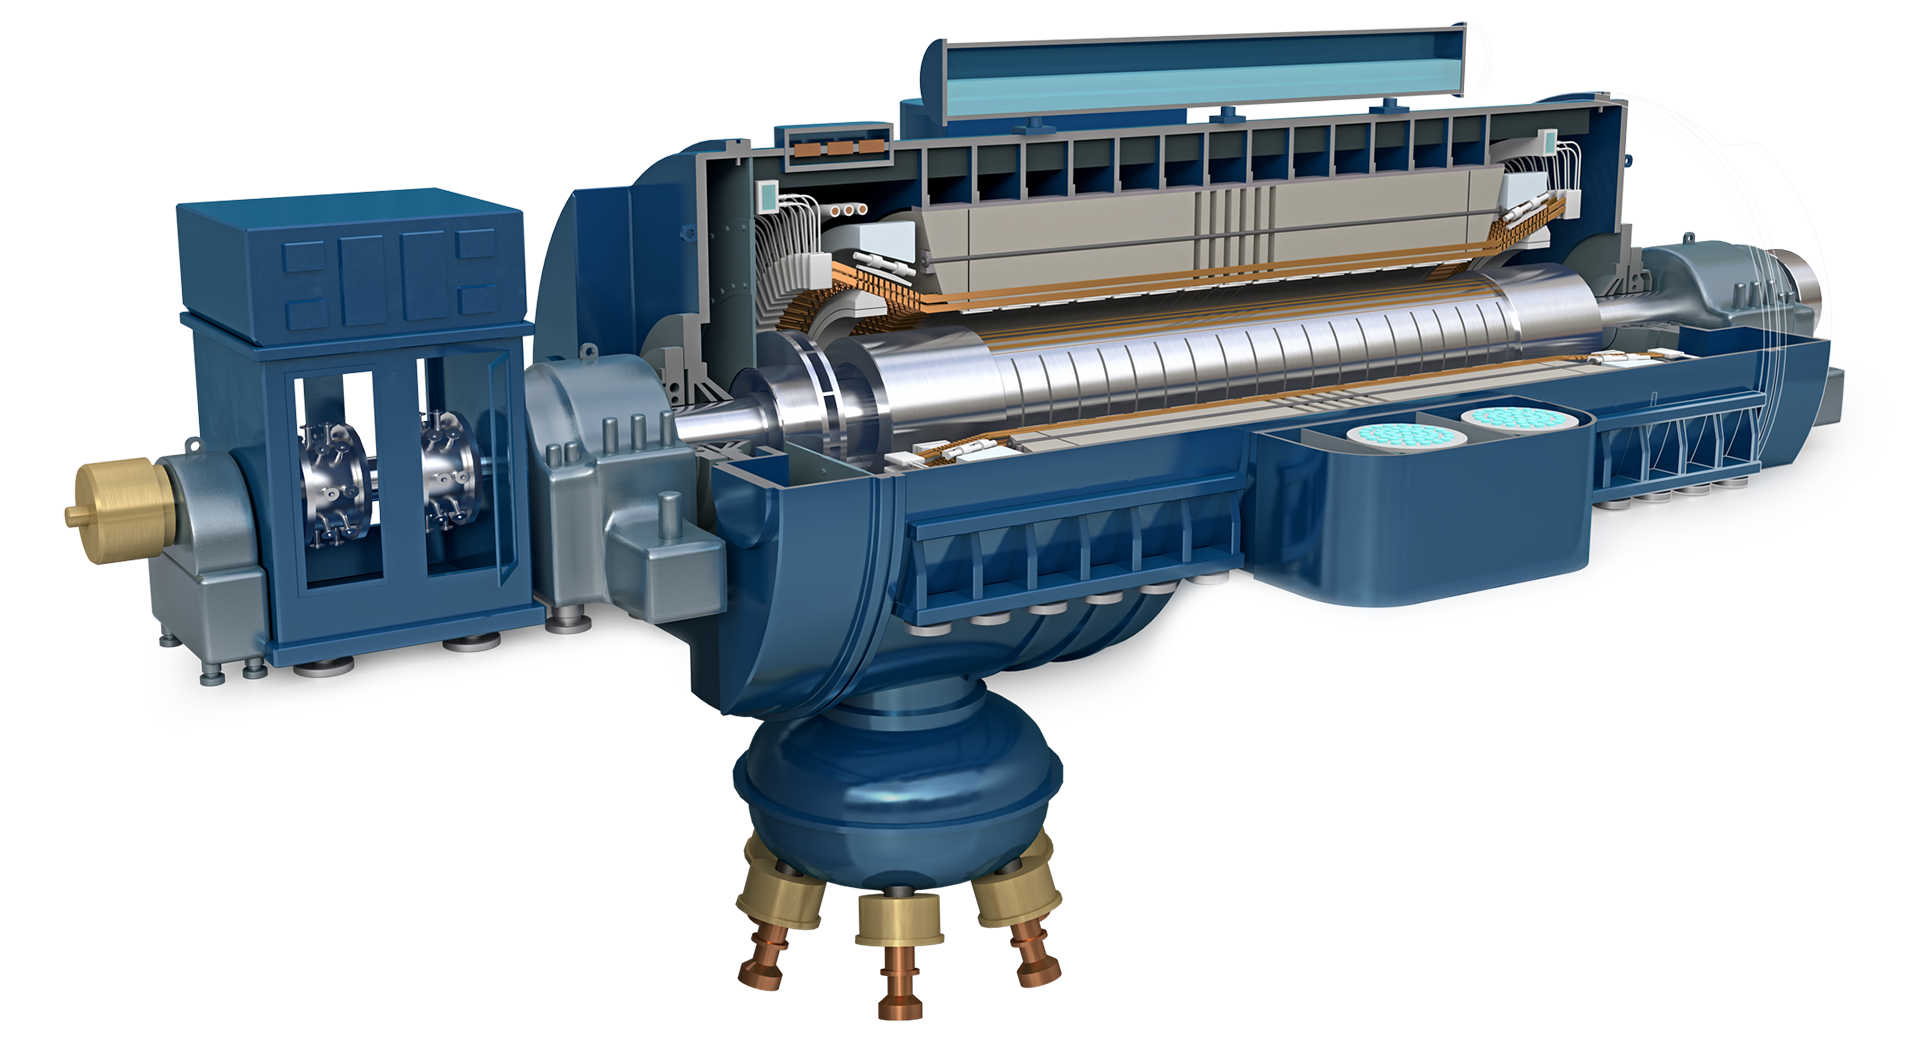 pie Impossible Pakistan 2-Pole Gigatop Water Cooled Generator | GE Steam Power